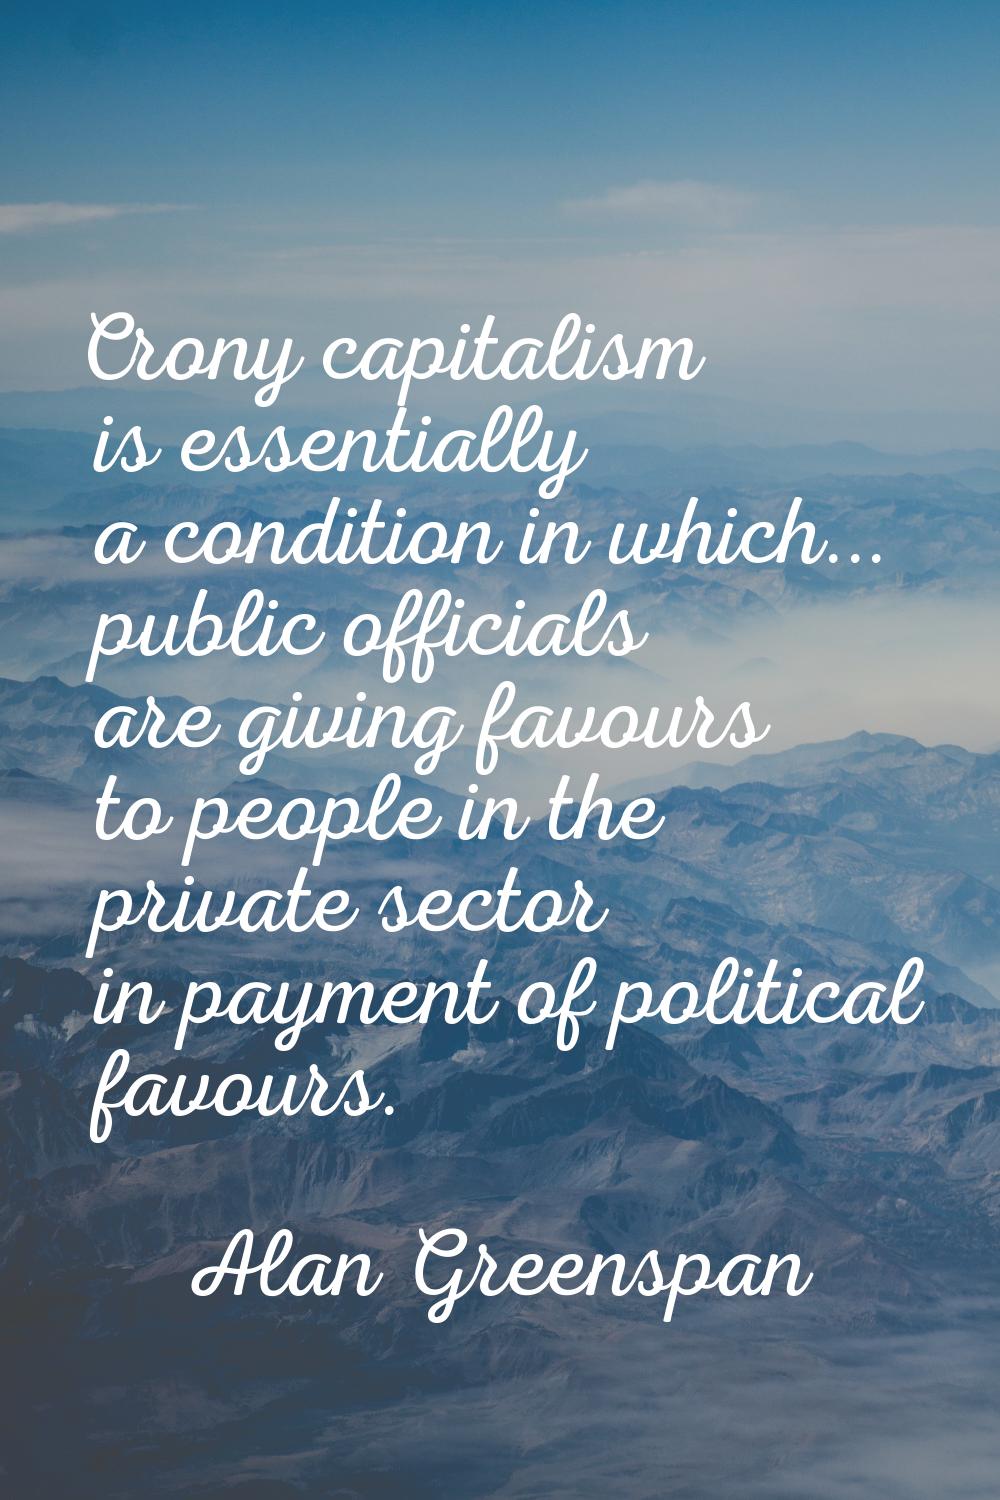 Crony capitalism is essentially a condition in which... public officials are giving favours to peop